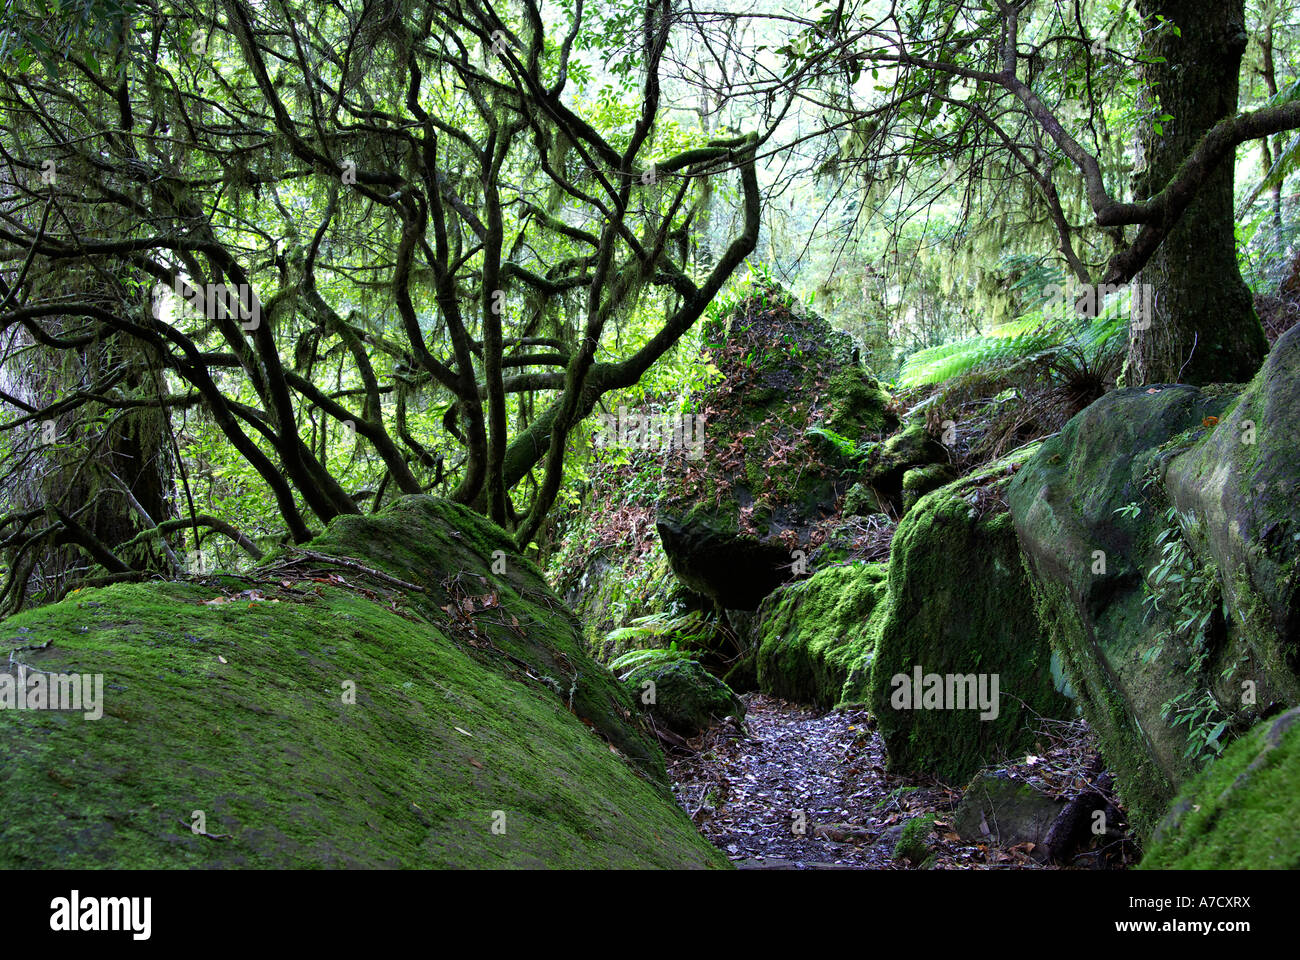 moss rocks and trees in the oxley world heritage rainforest with lichen old mans beard hanging from old tree Stock Photo